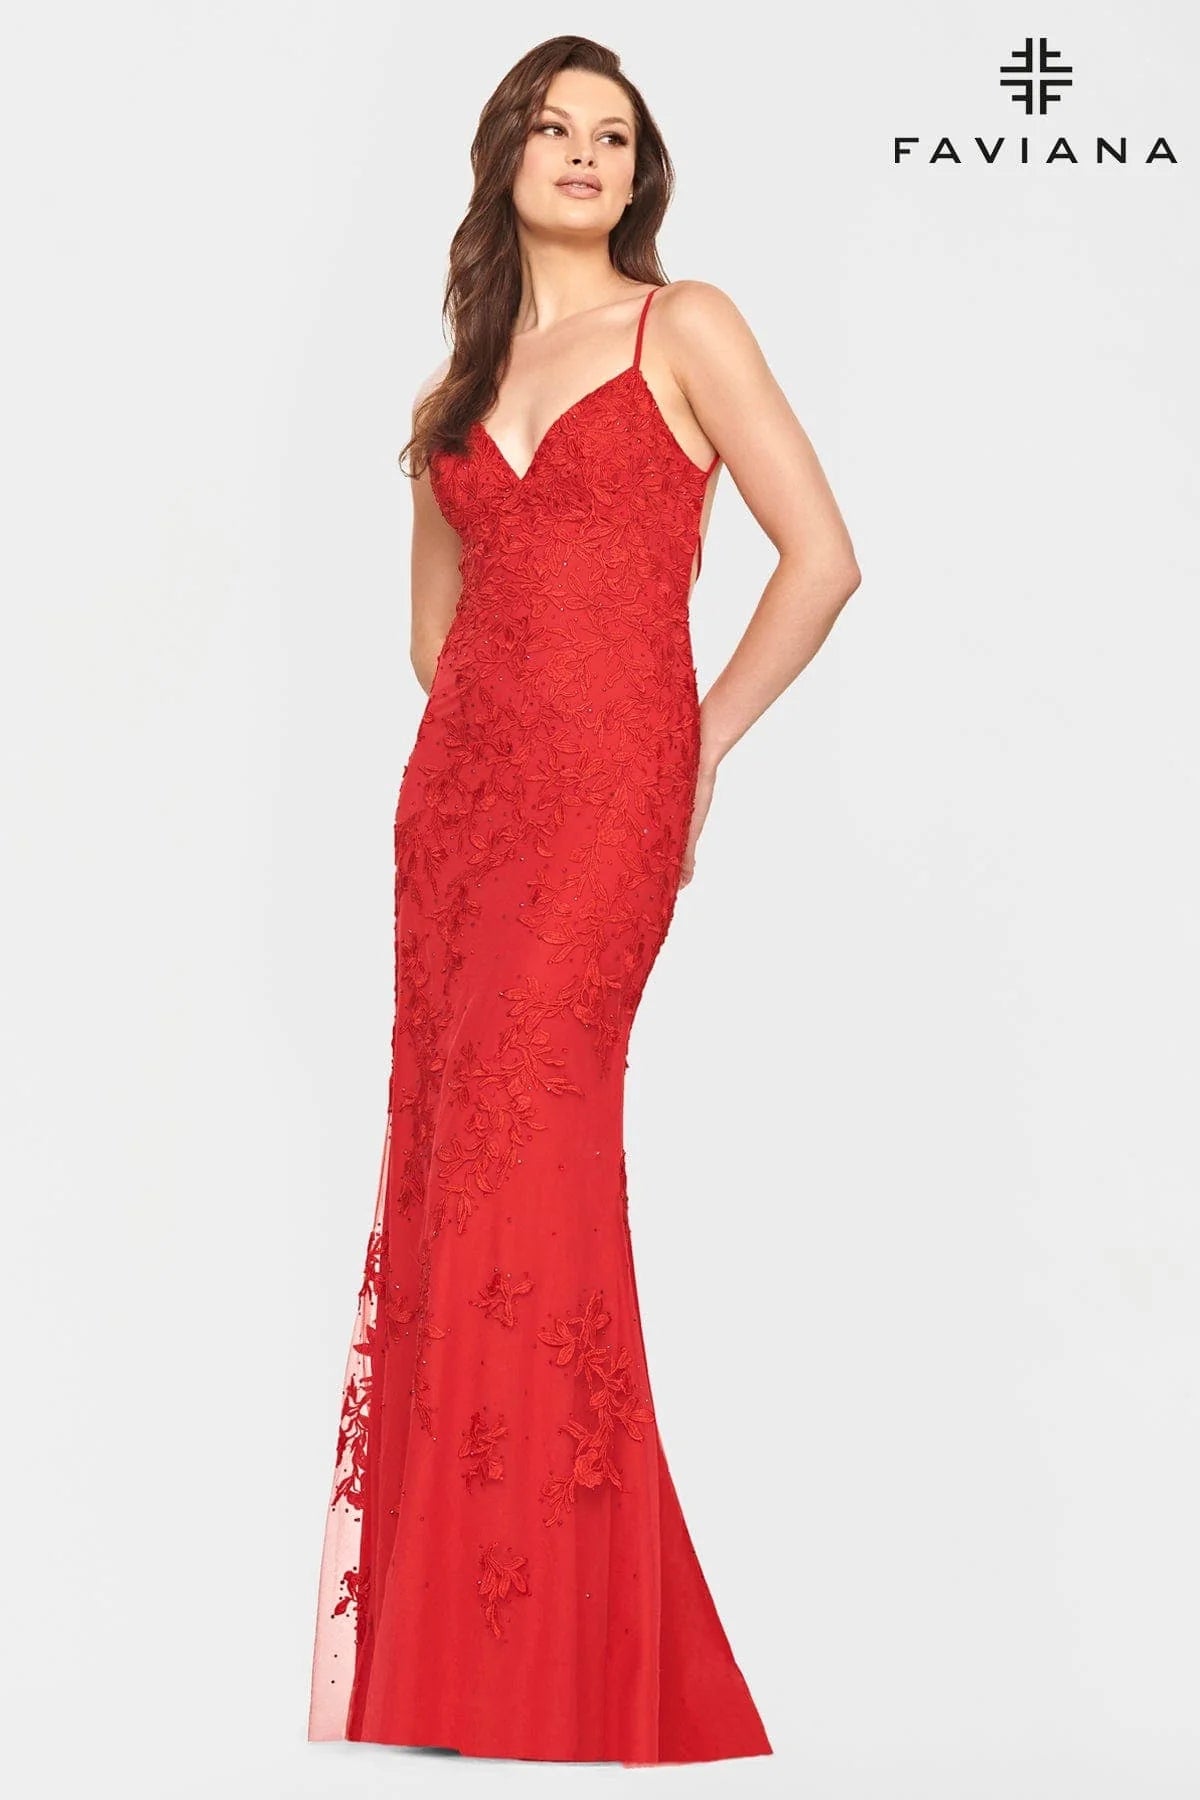 Red long v-neck dress made with dainty lace tulle 